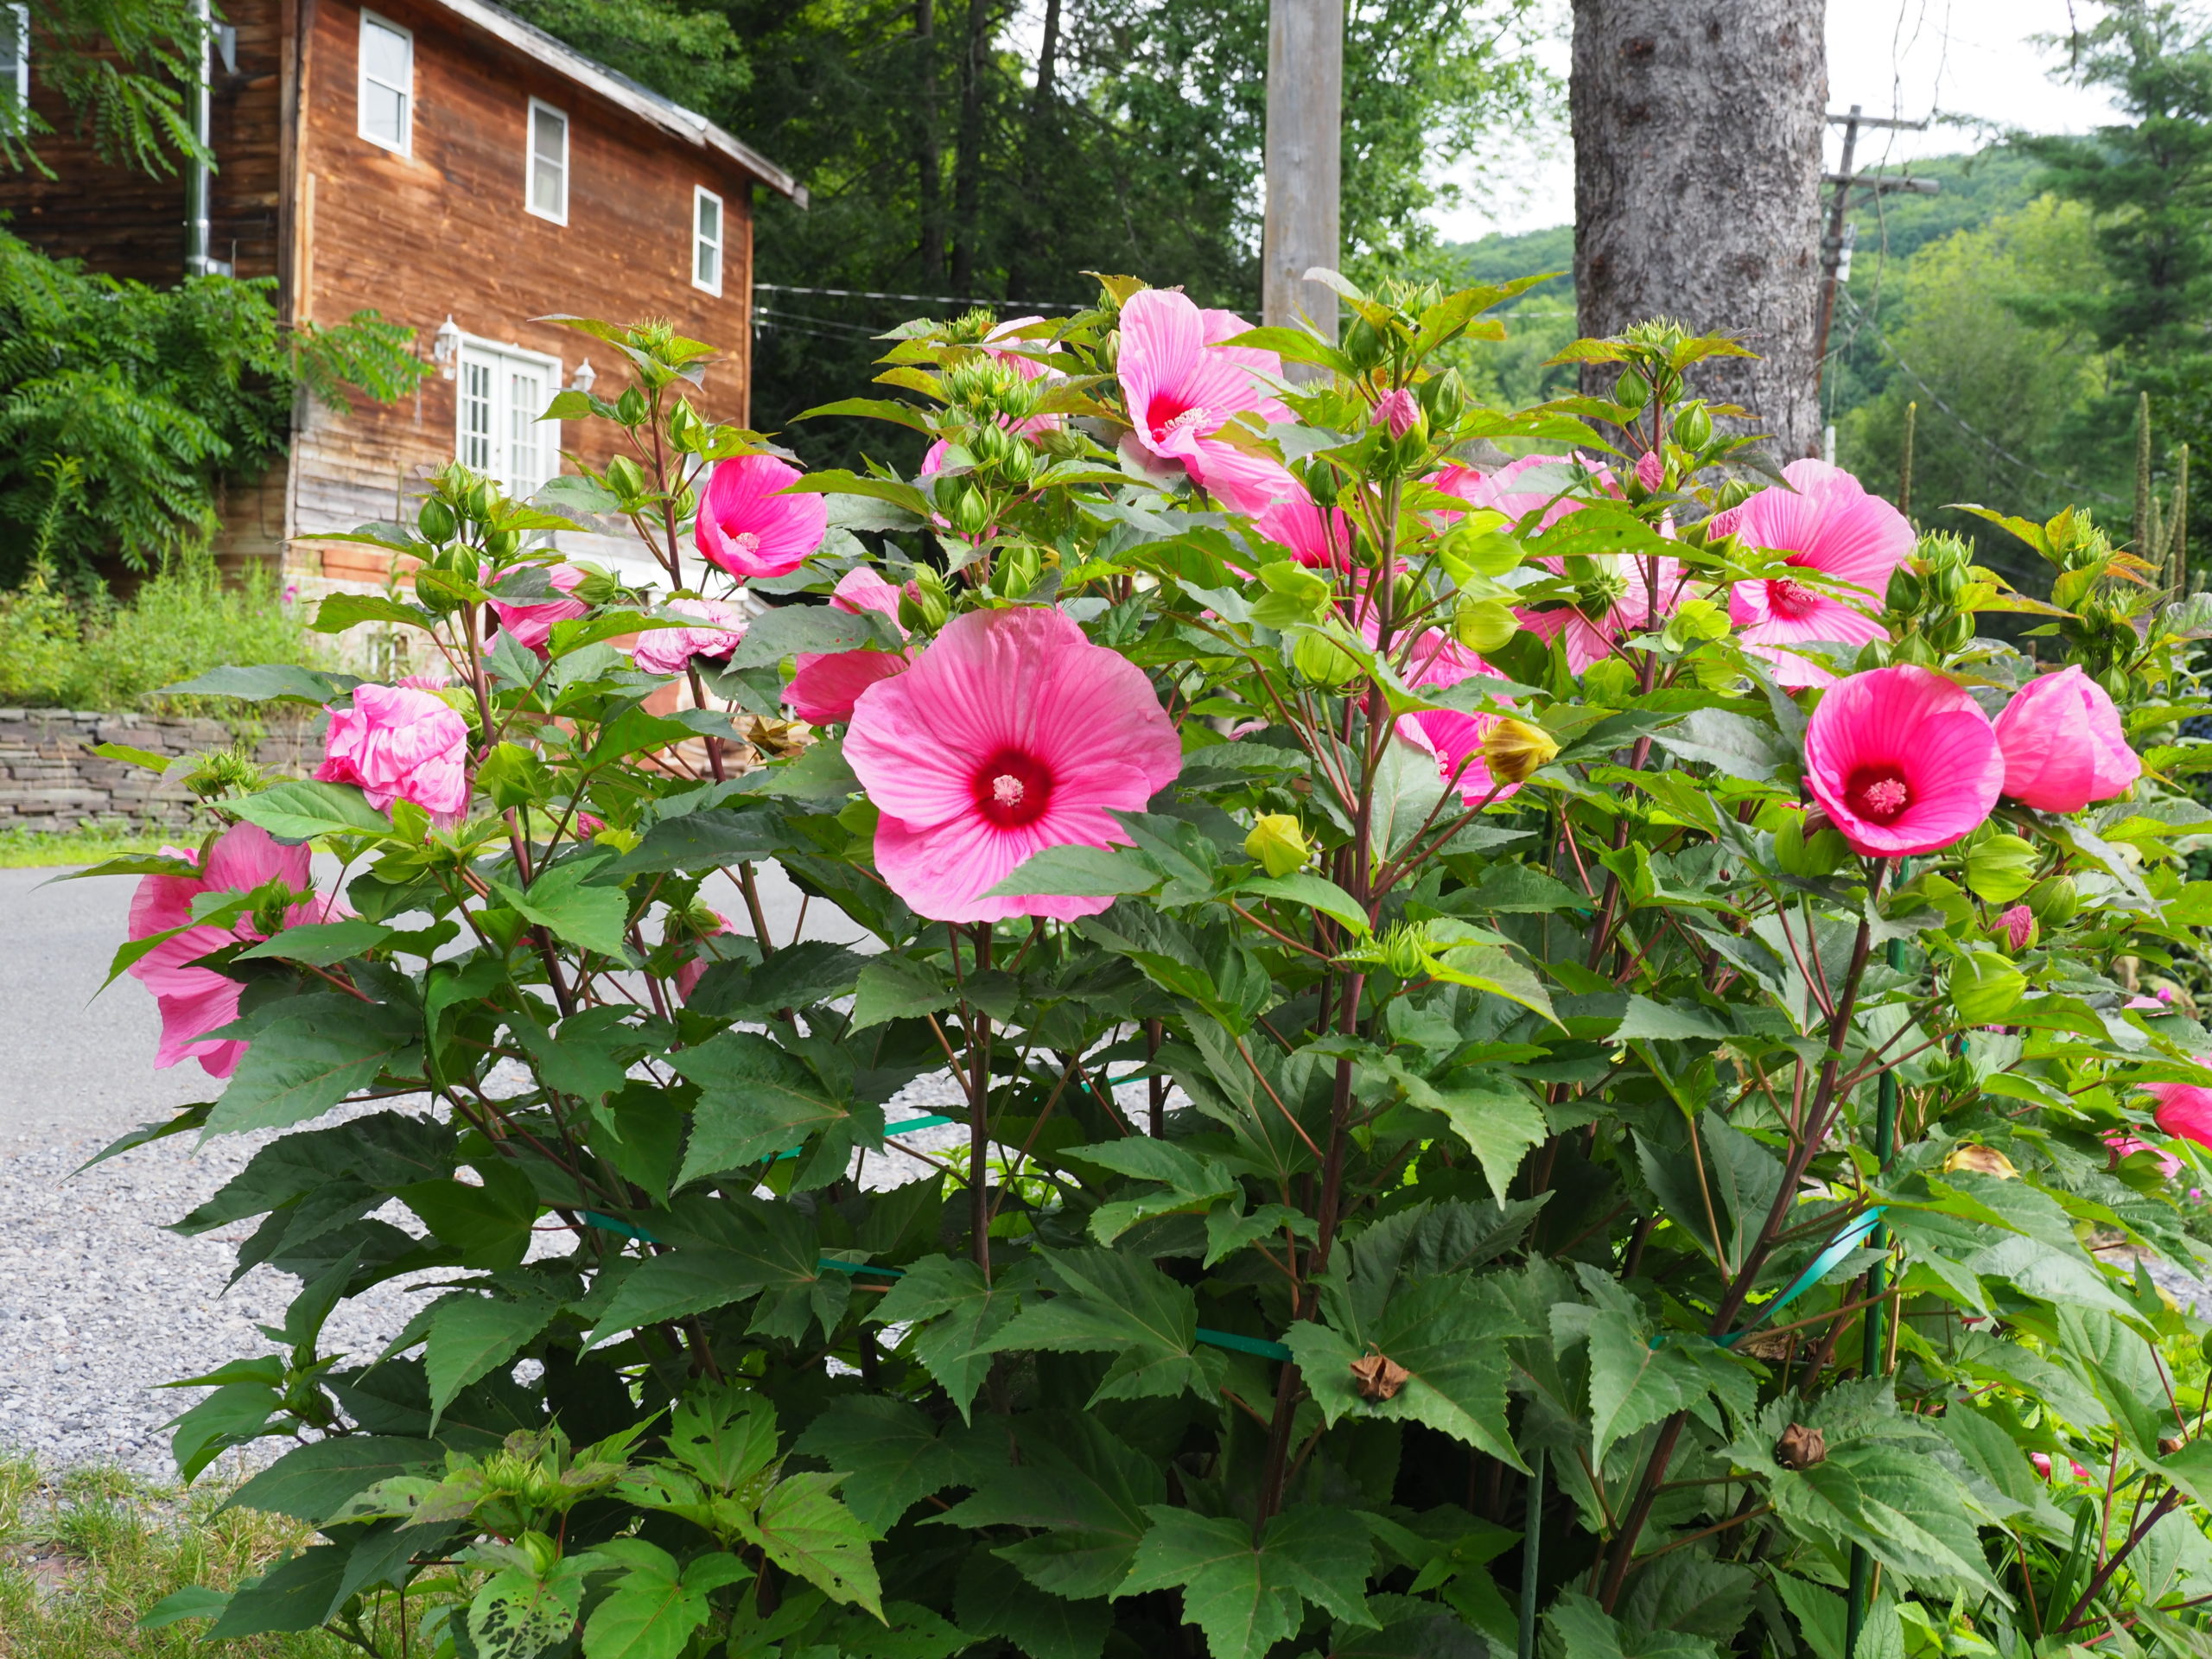 Hibiscus “Brandy Punch” thrives in August heat and can have 20 or more flowers open at one time.